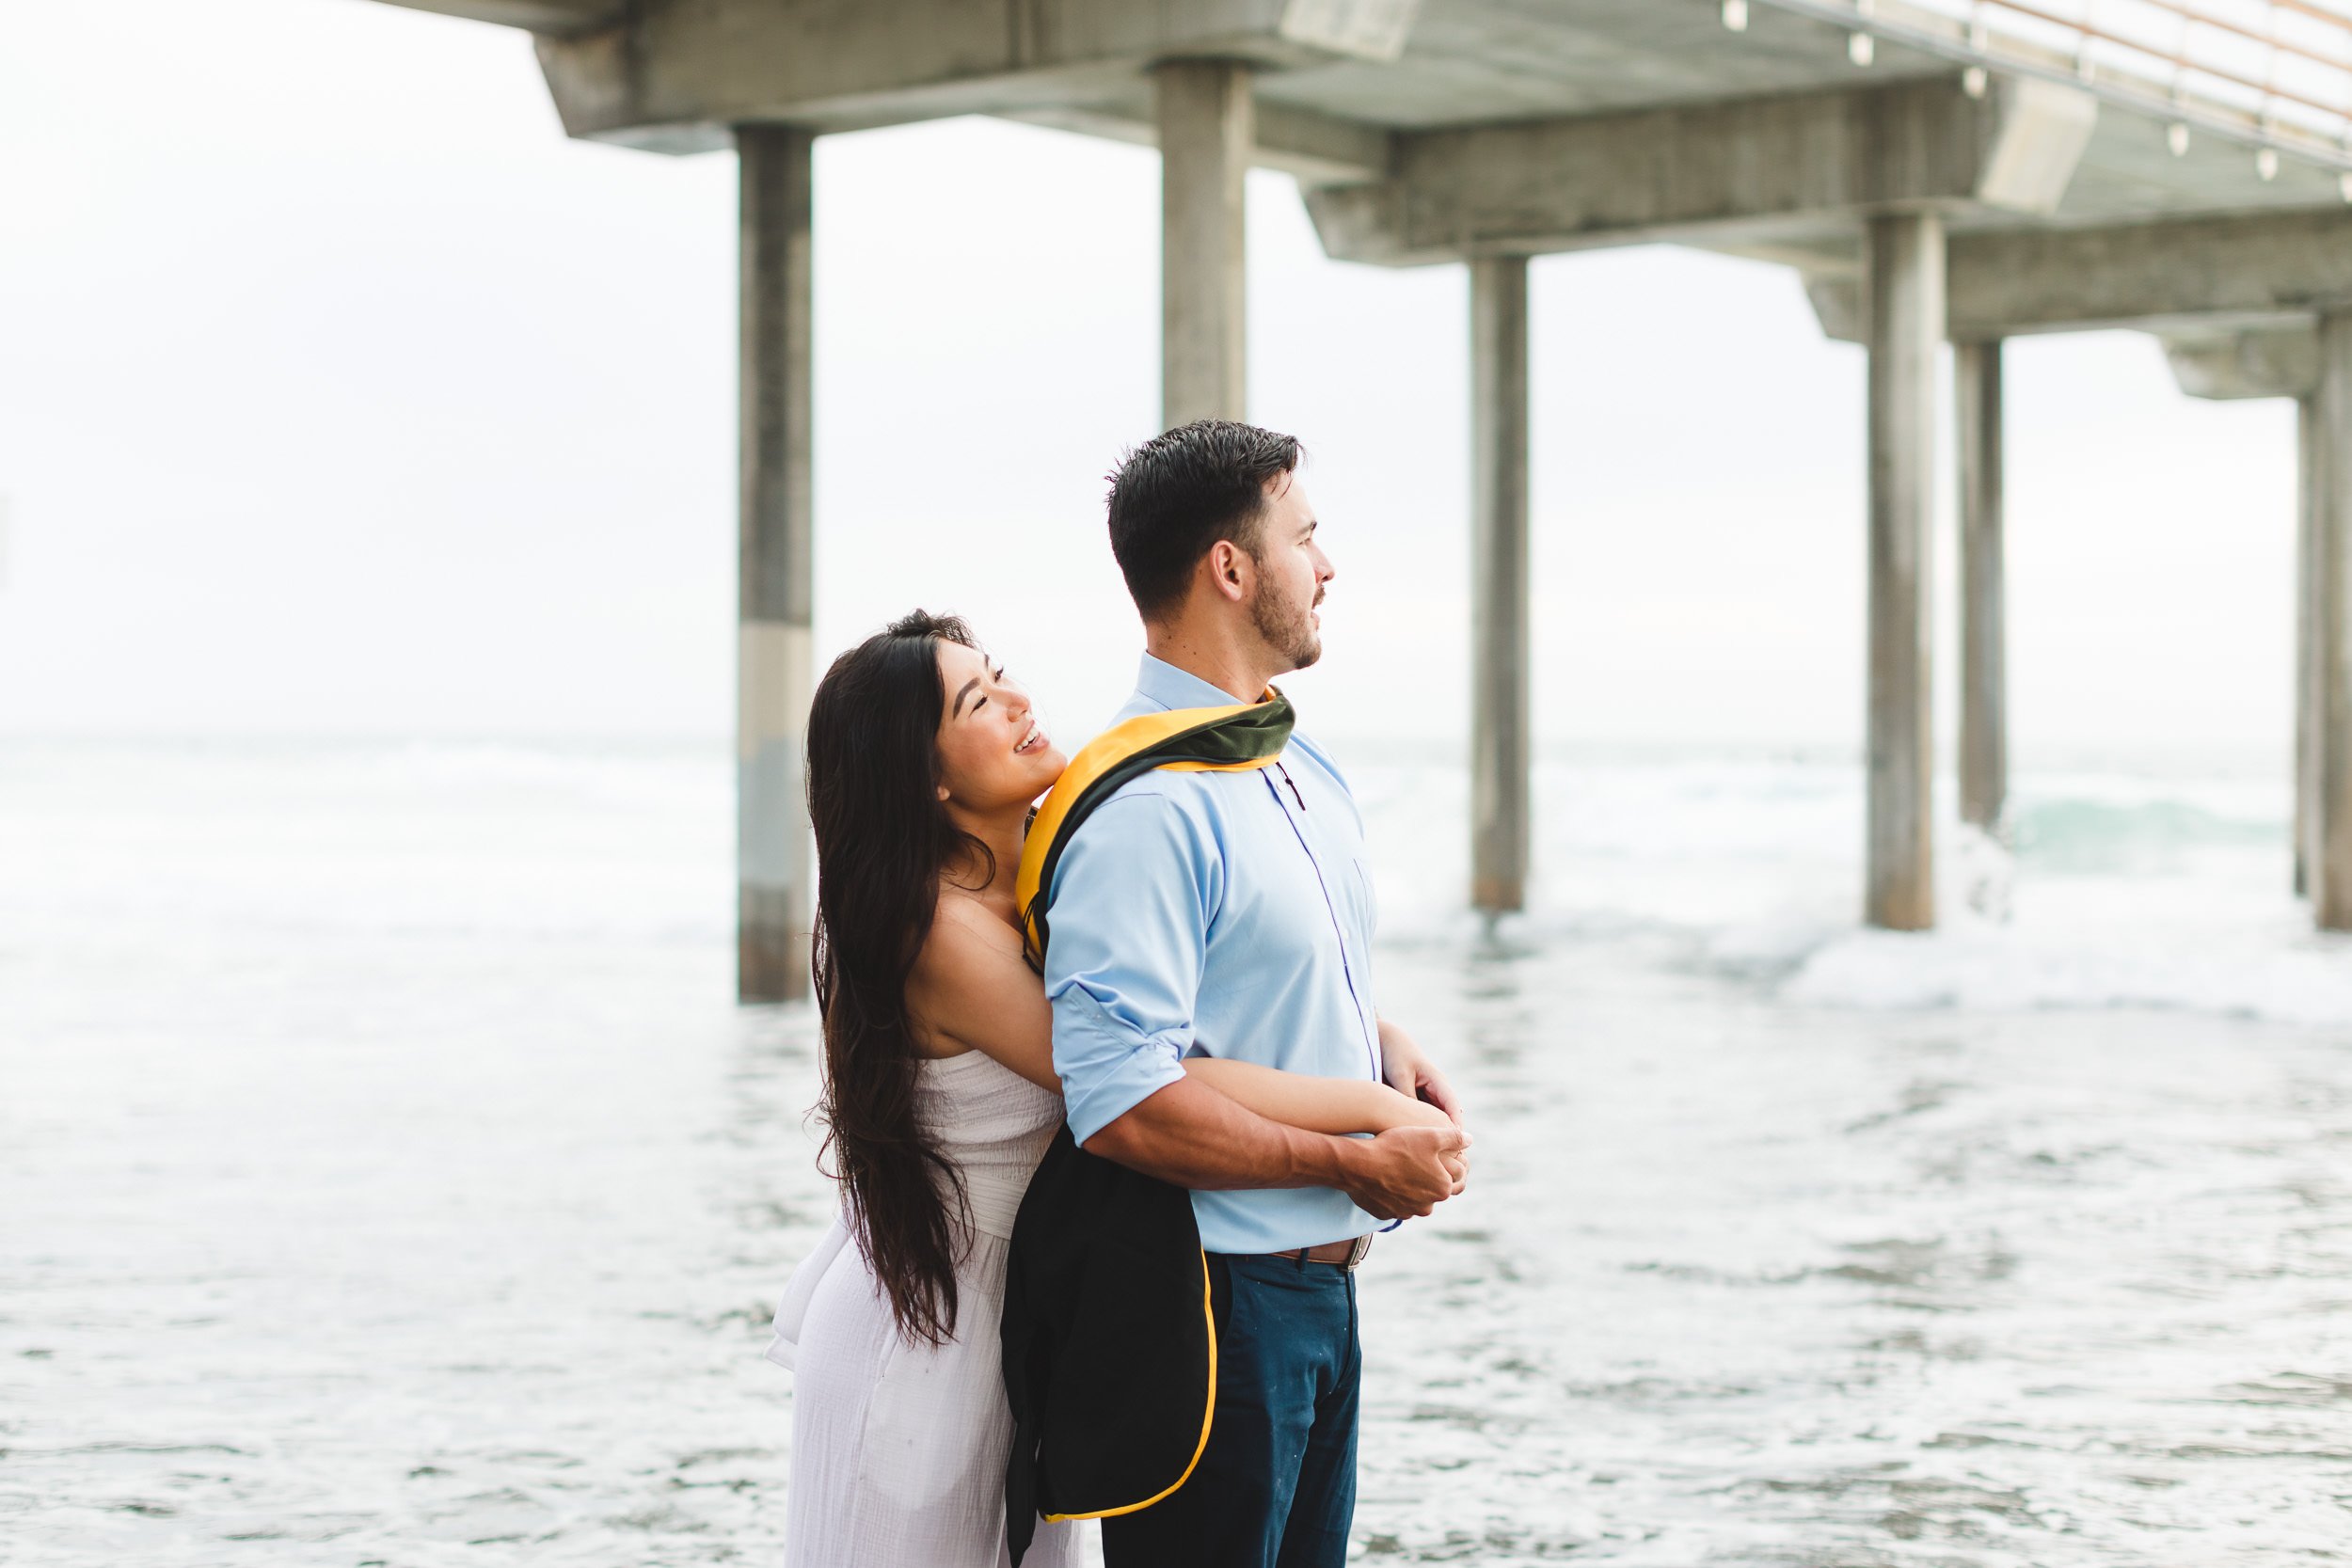  Graduation portraits for couples, PhD graduate with boyfriend at the beach.  Los Angeles, CA